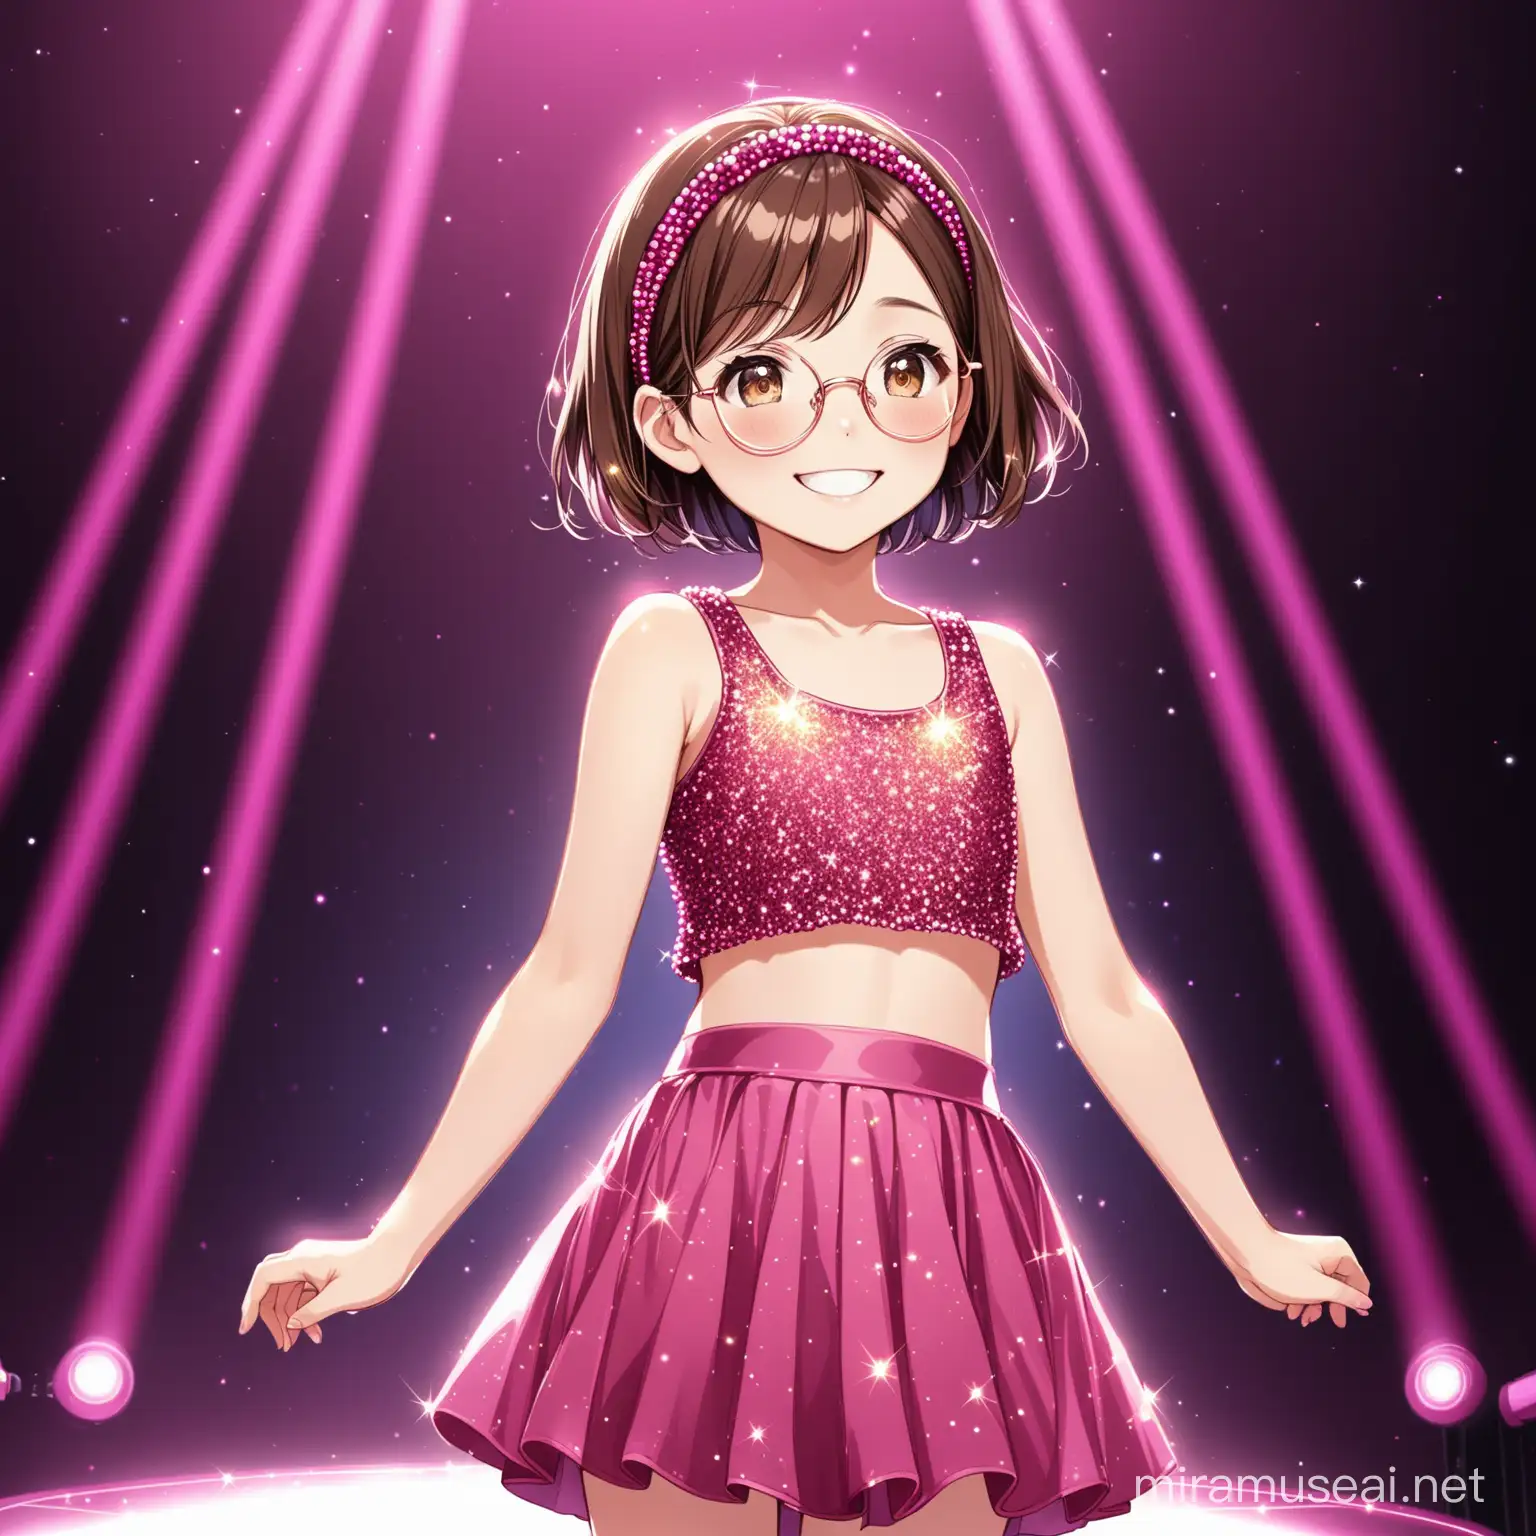 12 year old girl, short brown hair, rose gold glasses, smiling, wearing a dark pink, head band, wearing a sparkly dark pink crop top with beads hanging down, sparkly dark pink skirt with beads hanging down, standing on a stage